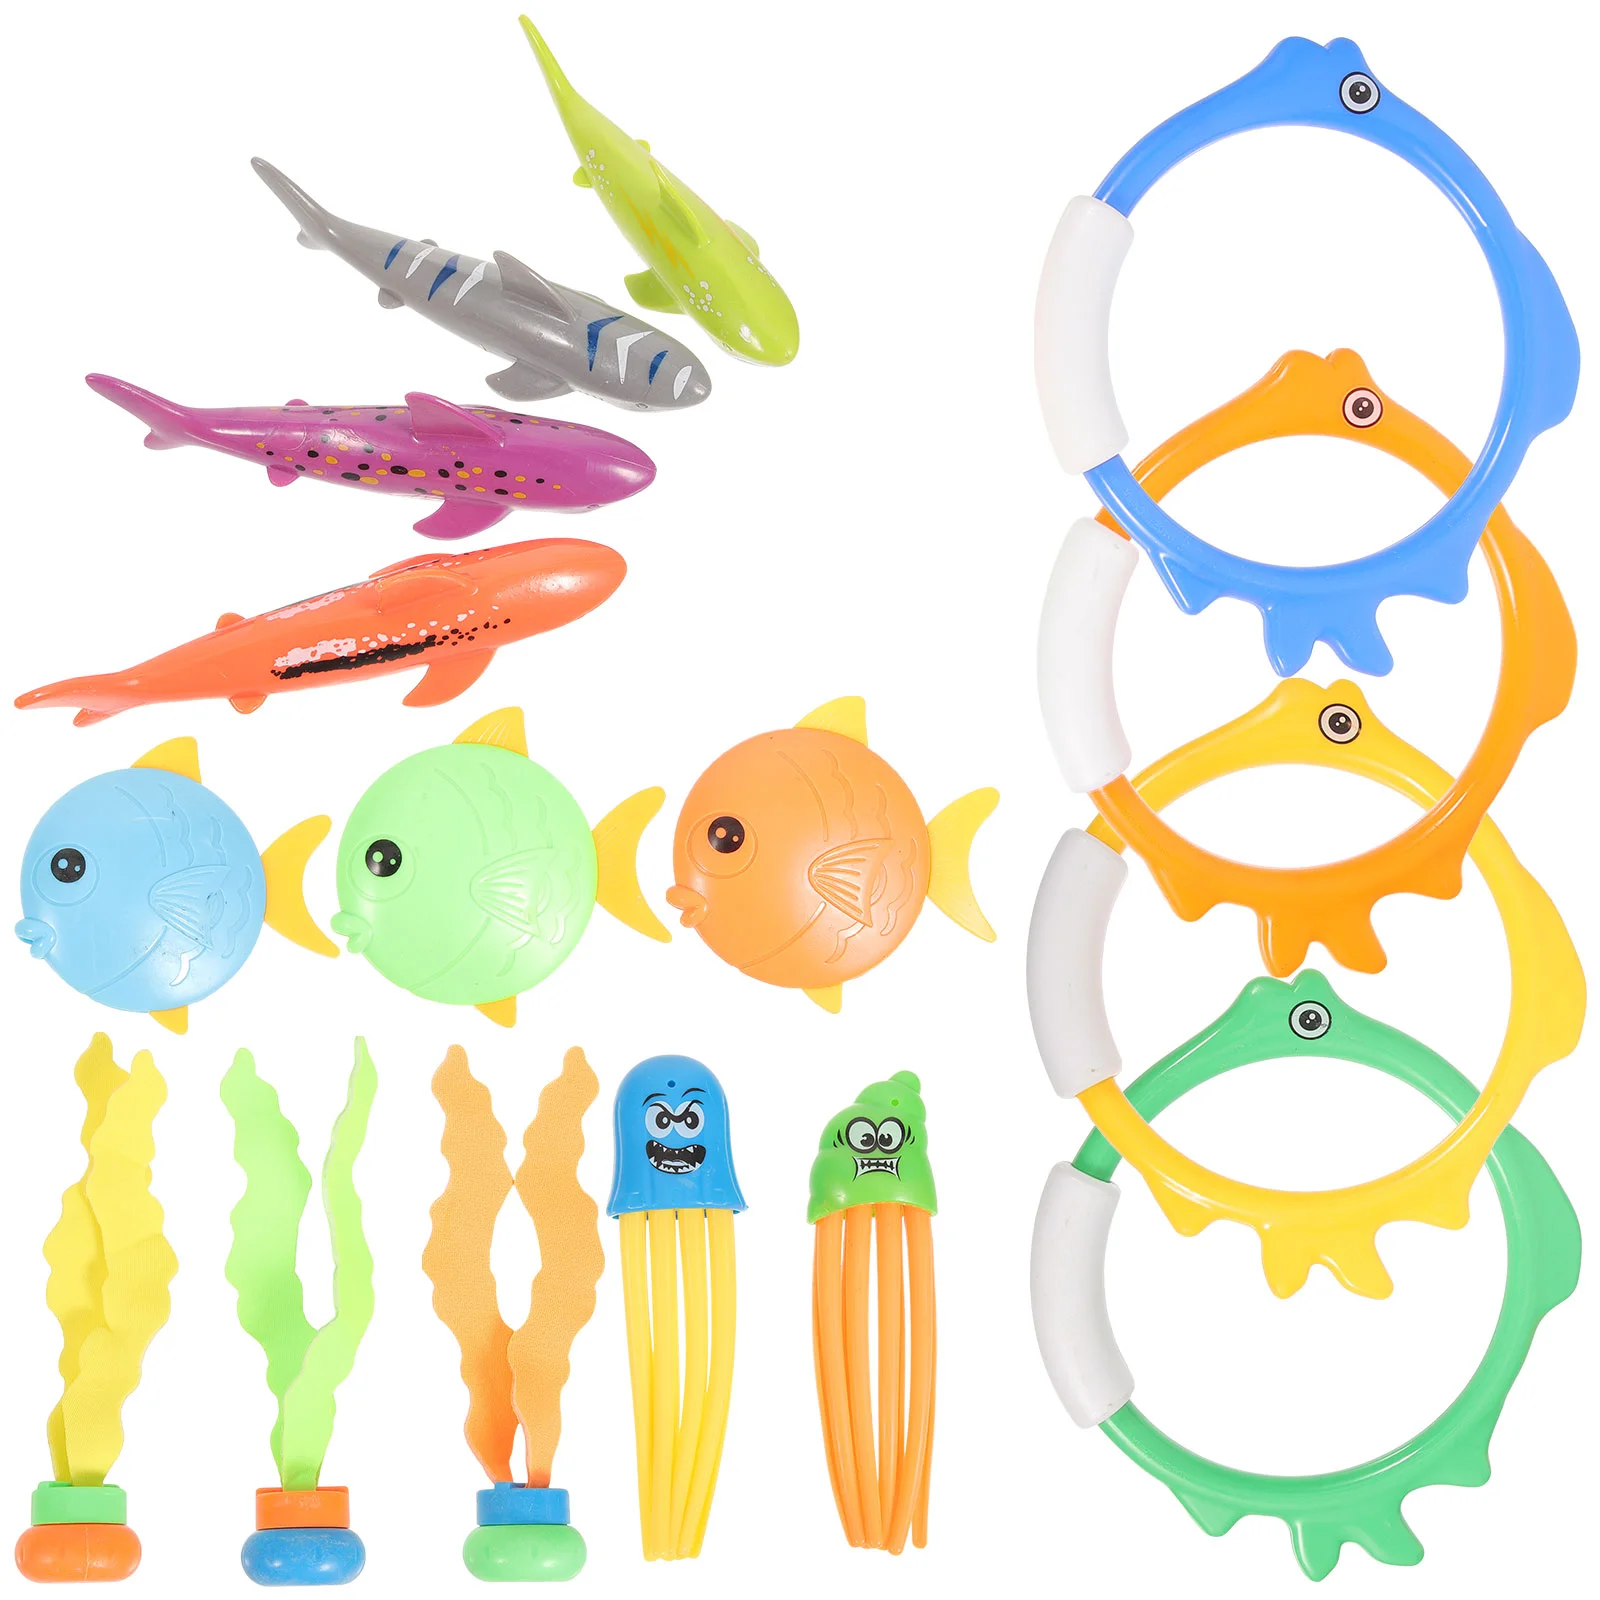 

1 Set of Kids Diving Toys Summer Beach Underwater Toys Swimming Game Toy Diving Sticks Rings